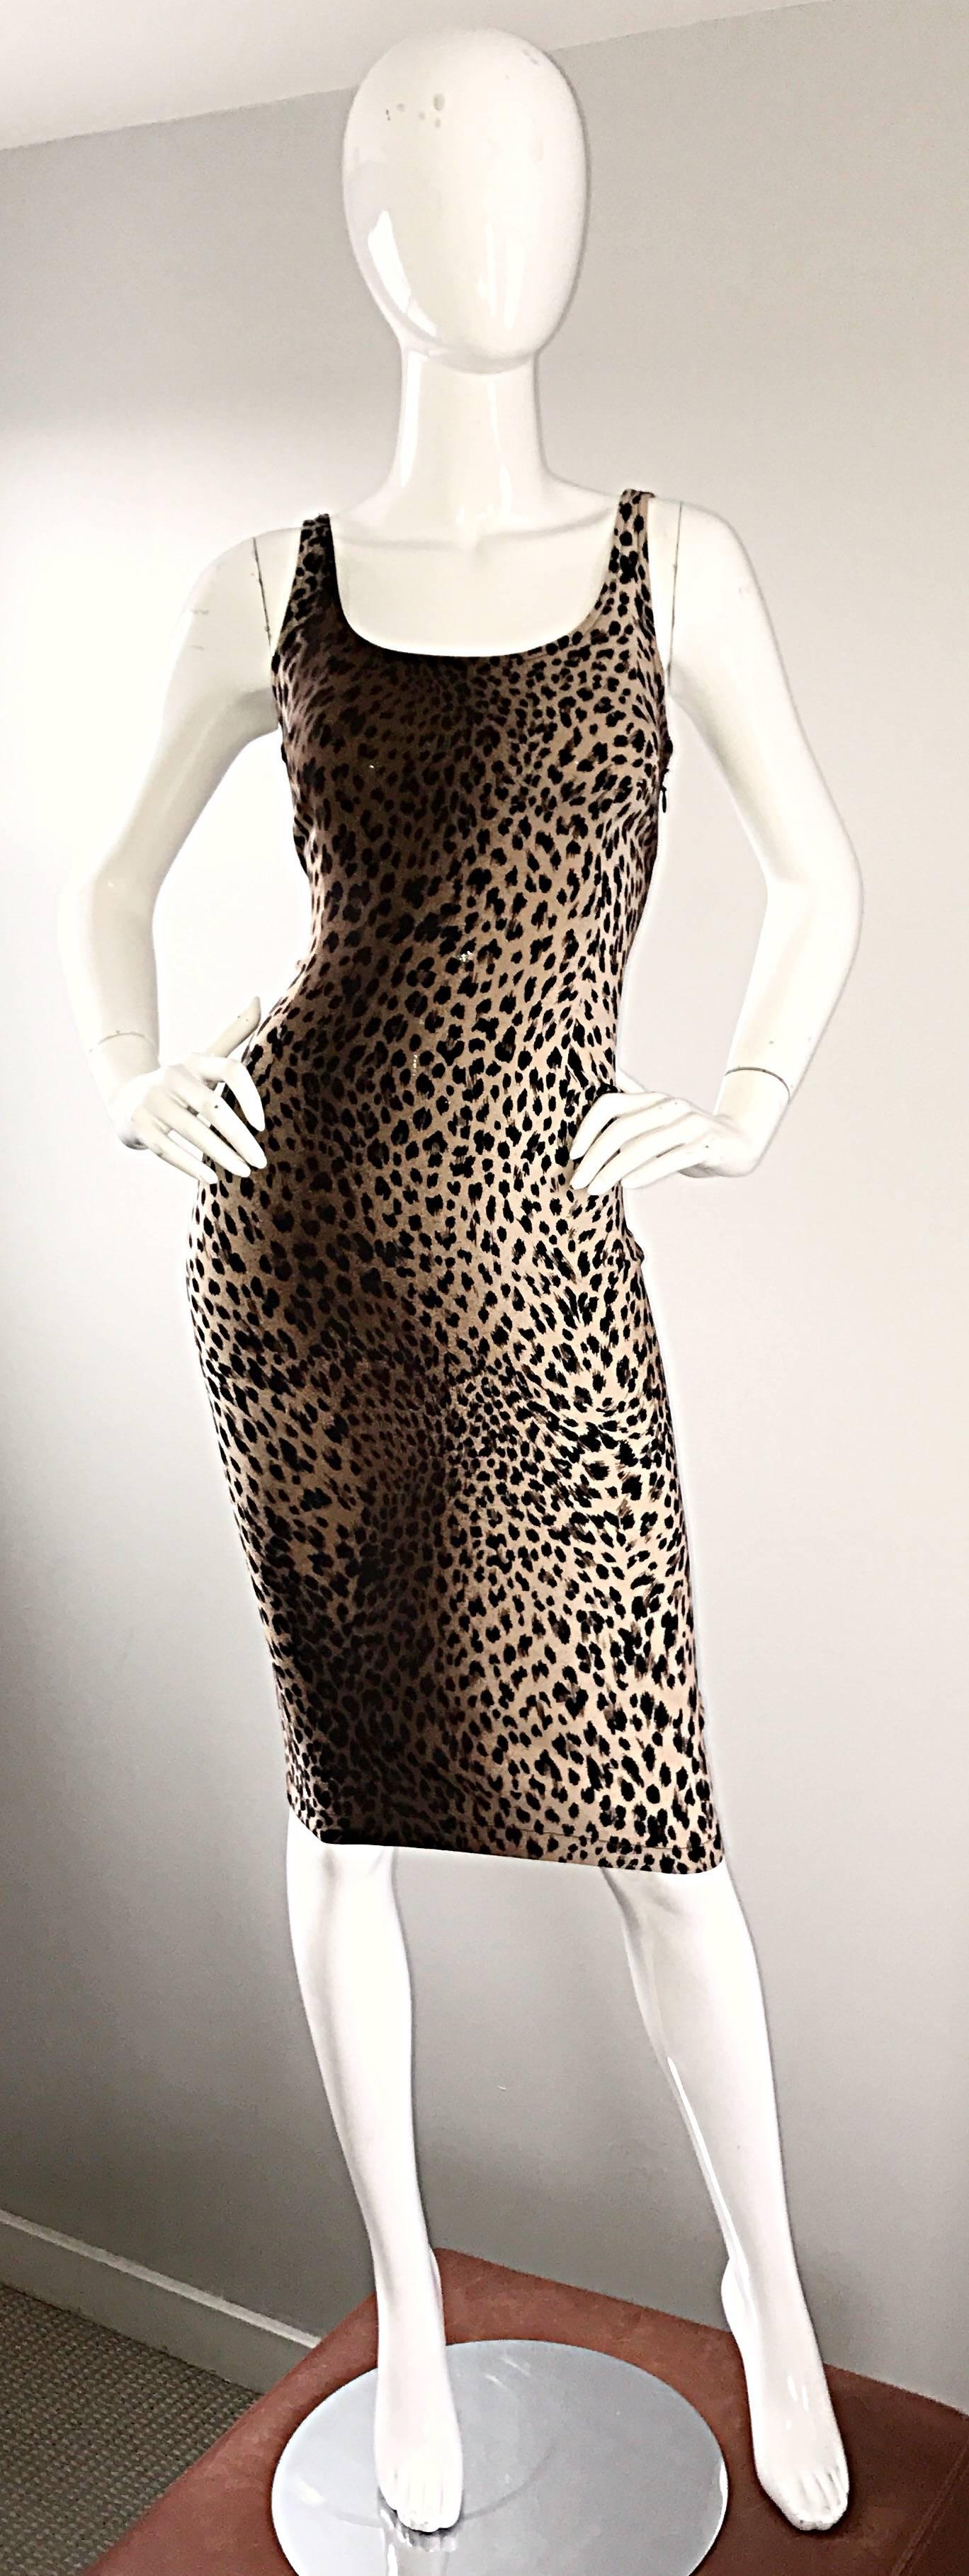 Sexy 1990s MOSCHINO leopard / cheetah ombré print bodcon dress! Soft rayon jersey hugs the body in all the right places. Features a tan, gray, brown, nude and black print that fades into lighter and darker prints. Hidden zipper up the side. Such a